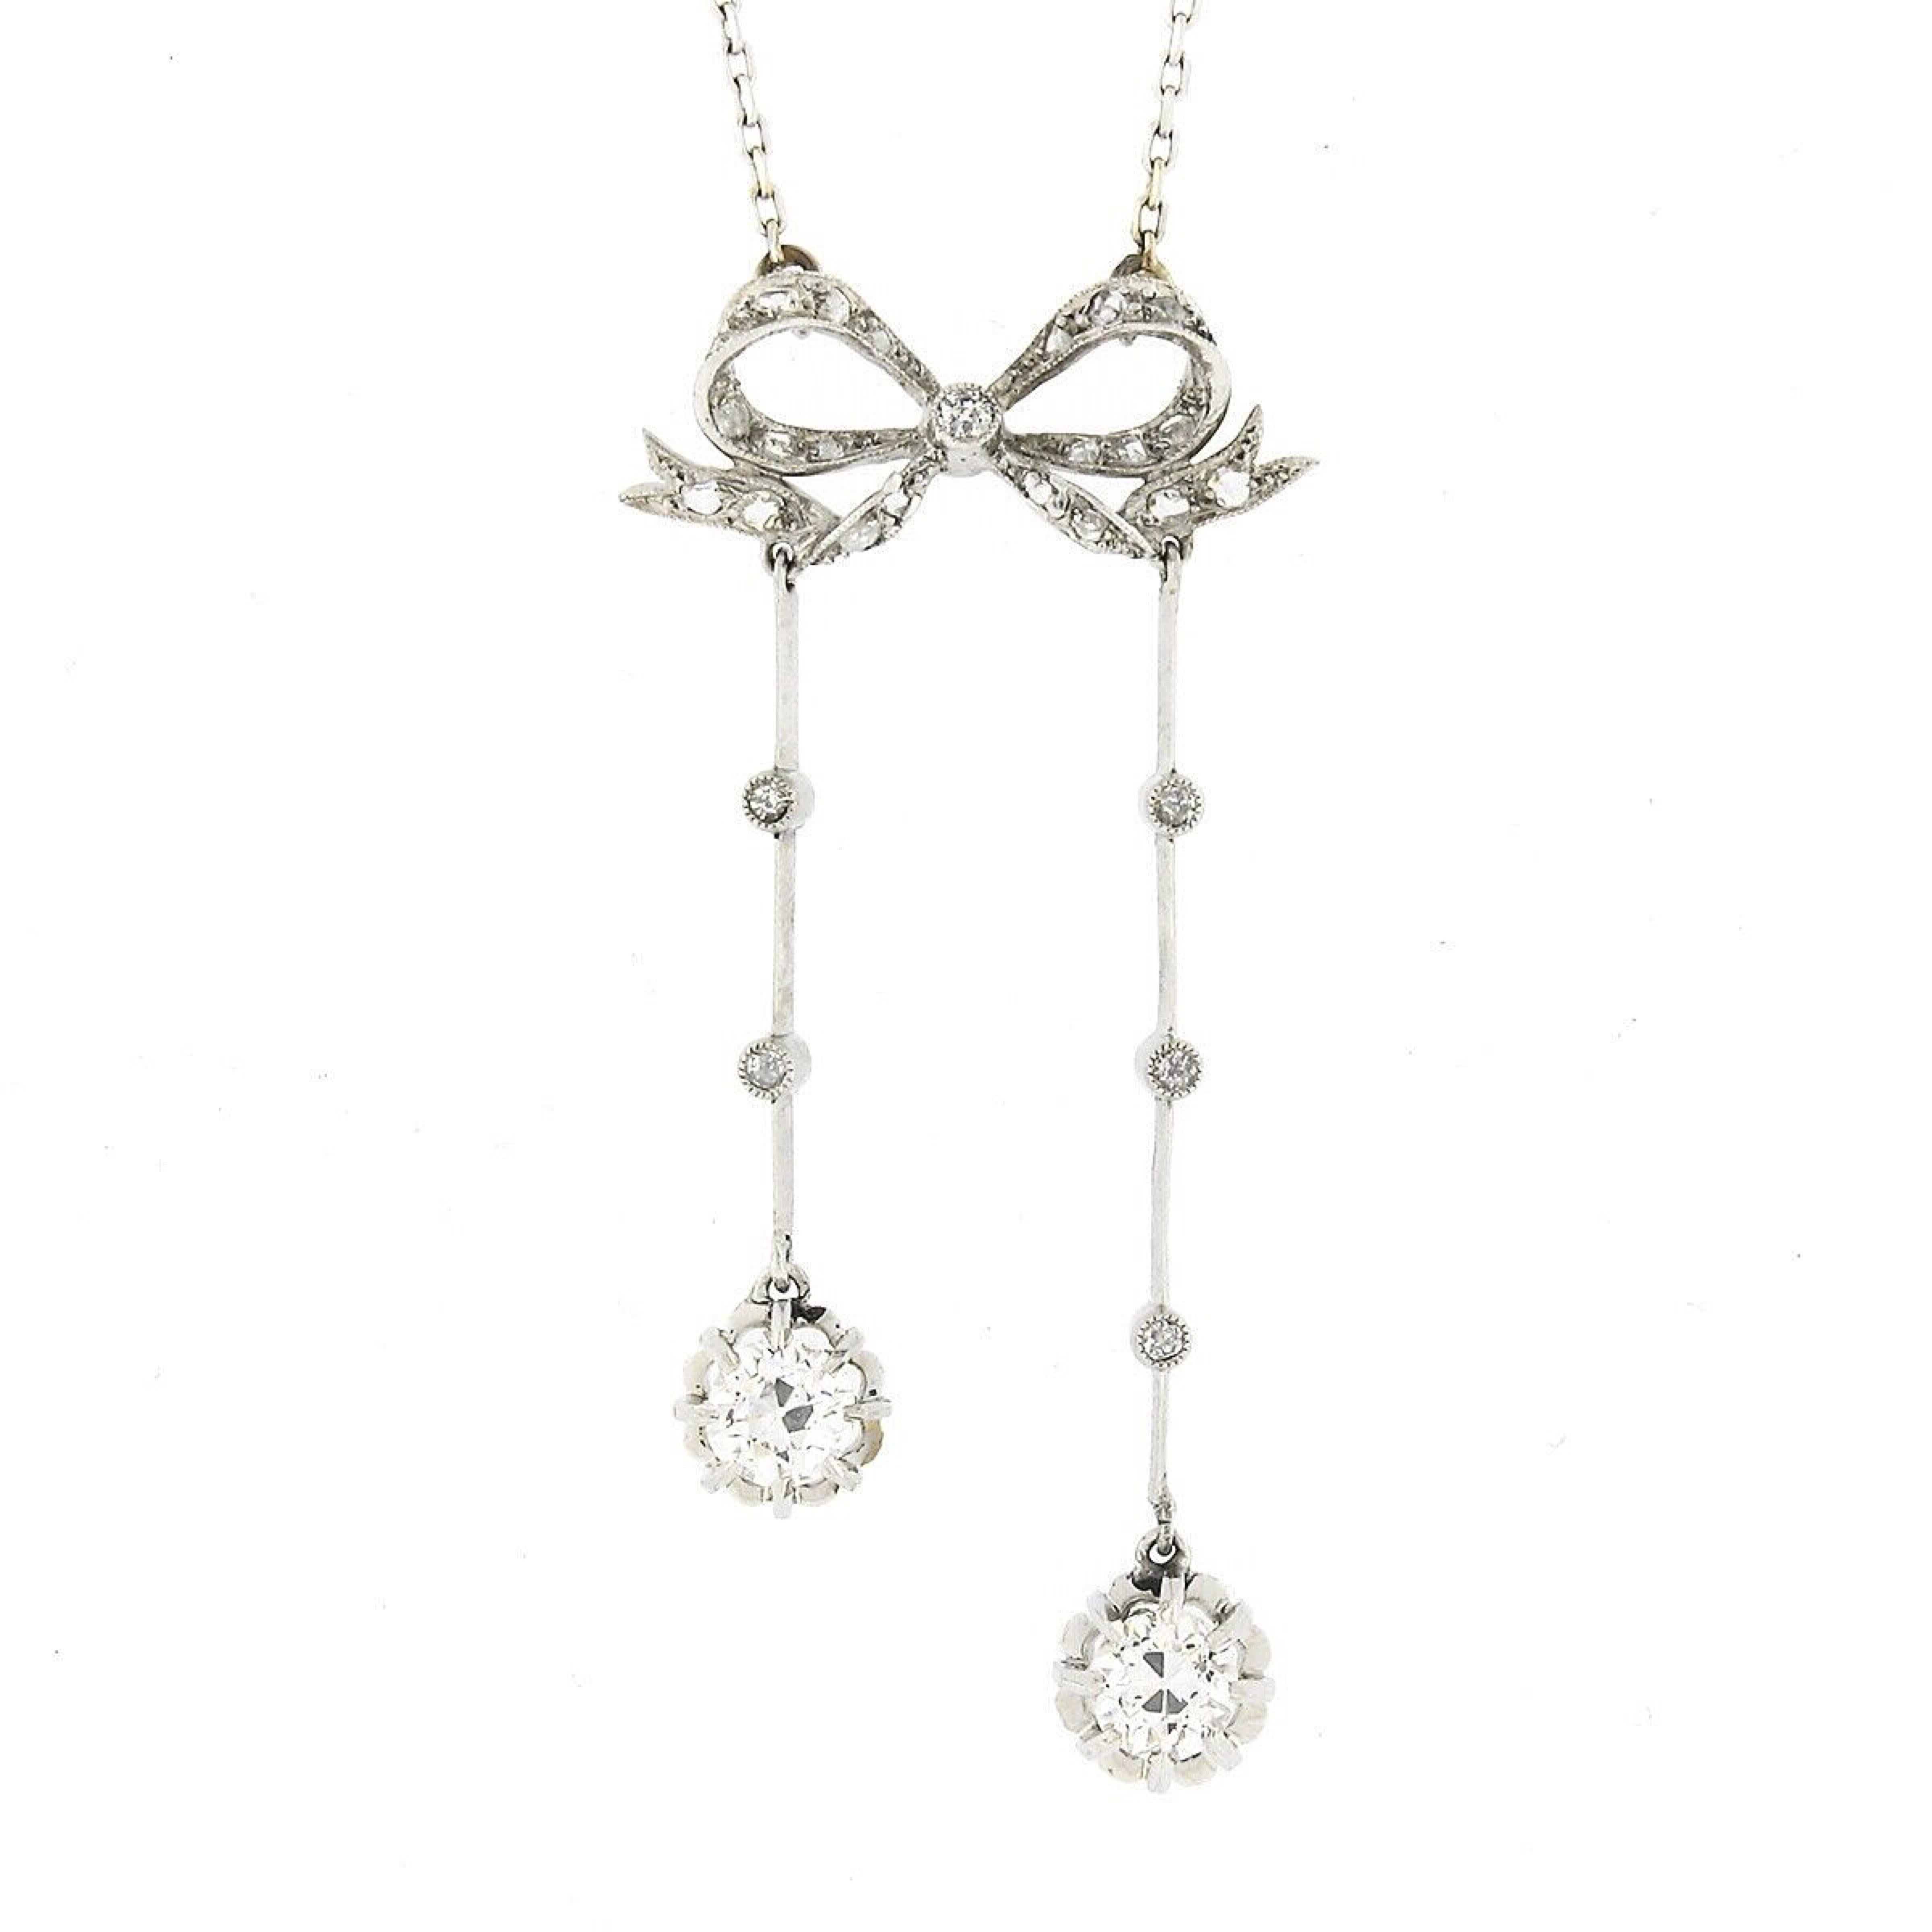 This absolutely beautiful antique pendant was crafted during the Belle Epoque era from solid 18k white gold and features old cut diamonds neatly set in a drop dangle style, bringing a remarkable amount of brilliance and shine to this piece. The